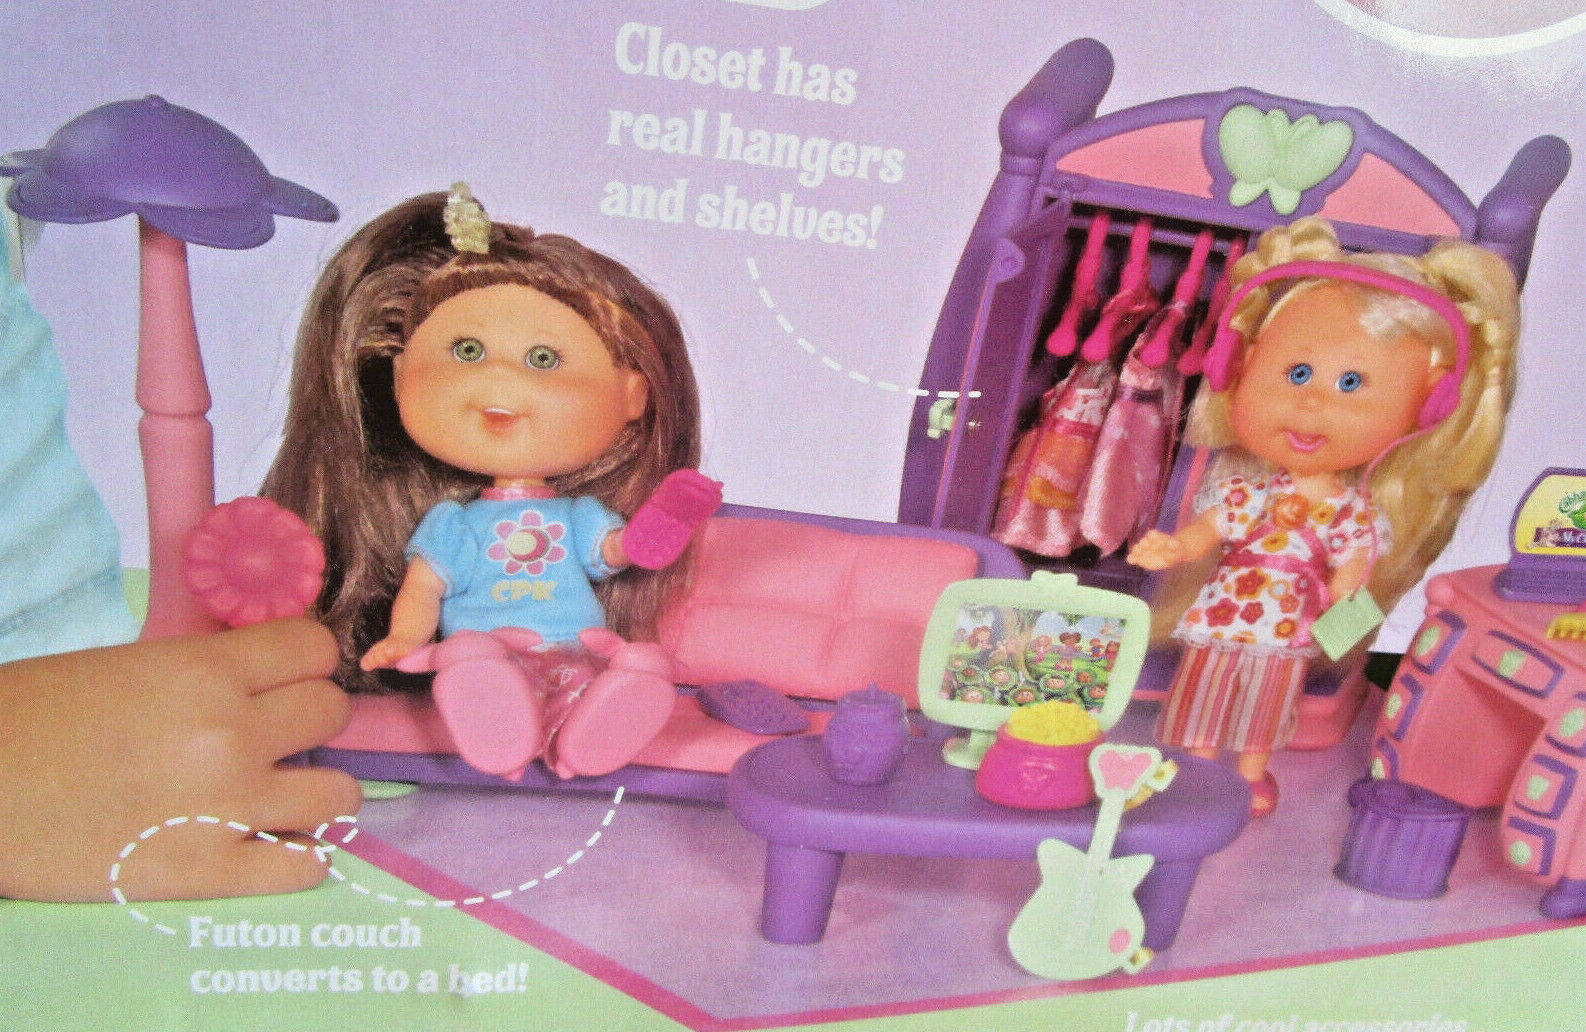 NEW 26 piece FURNITURE PLAY SET Cabbage Patch Lil Sprouts & dolls to 5" tall - $18.99